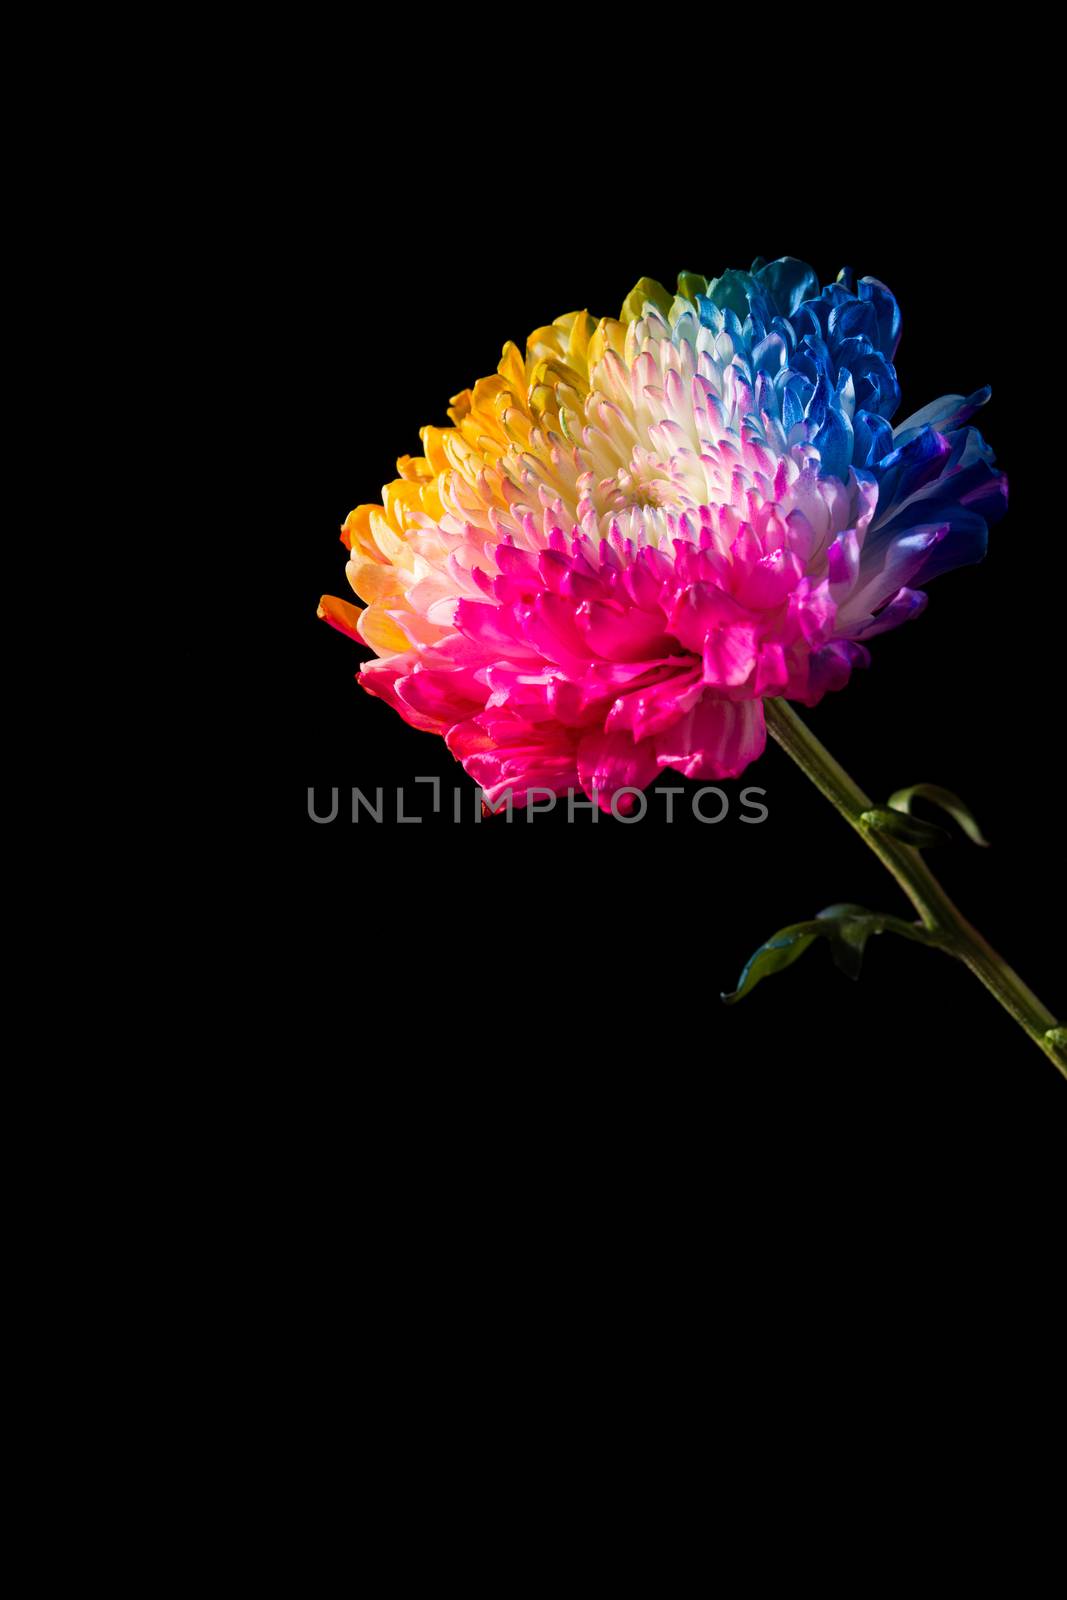 Multicolored flowers  by chandlervid85